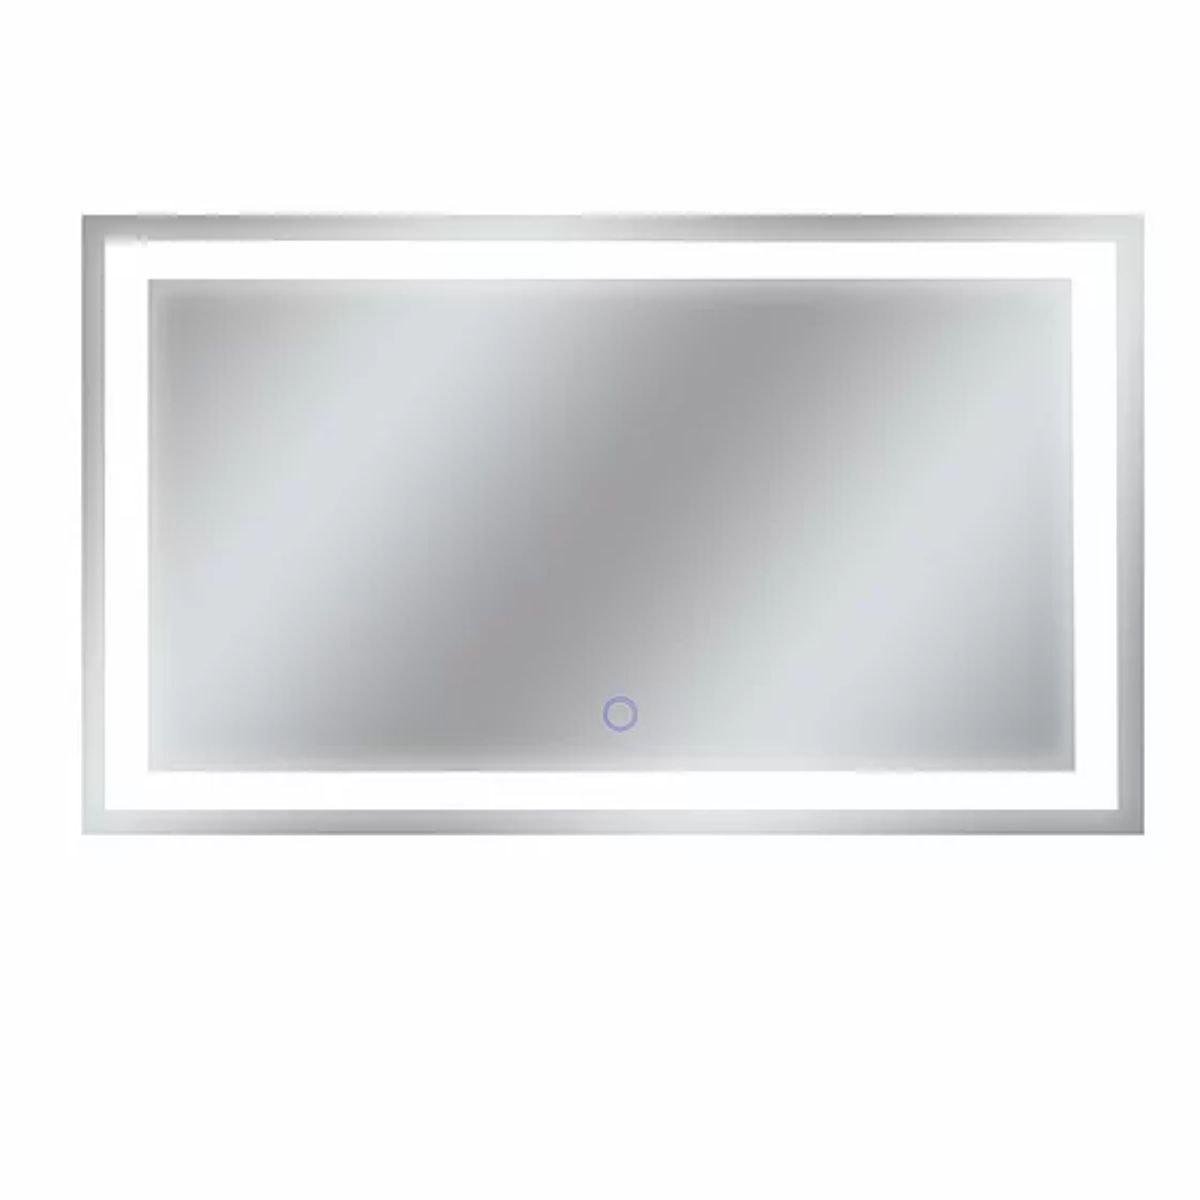 Edison 60 in. x 35 in. LED Wall Mirror with Touch On/Off Dimmer Function